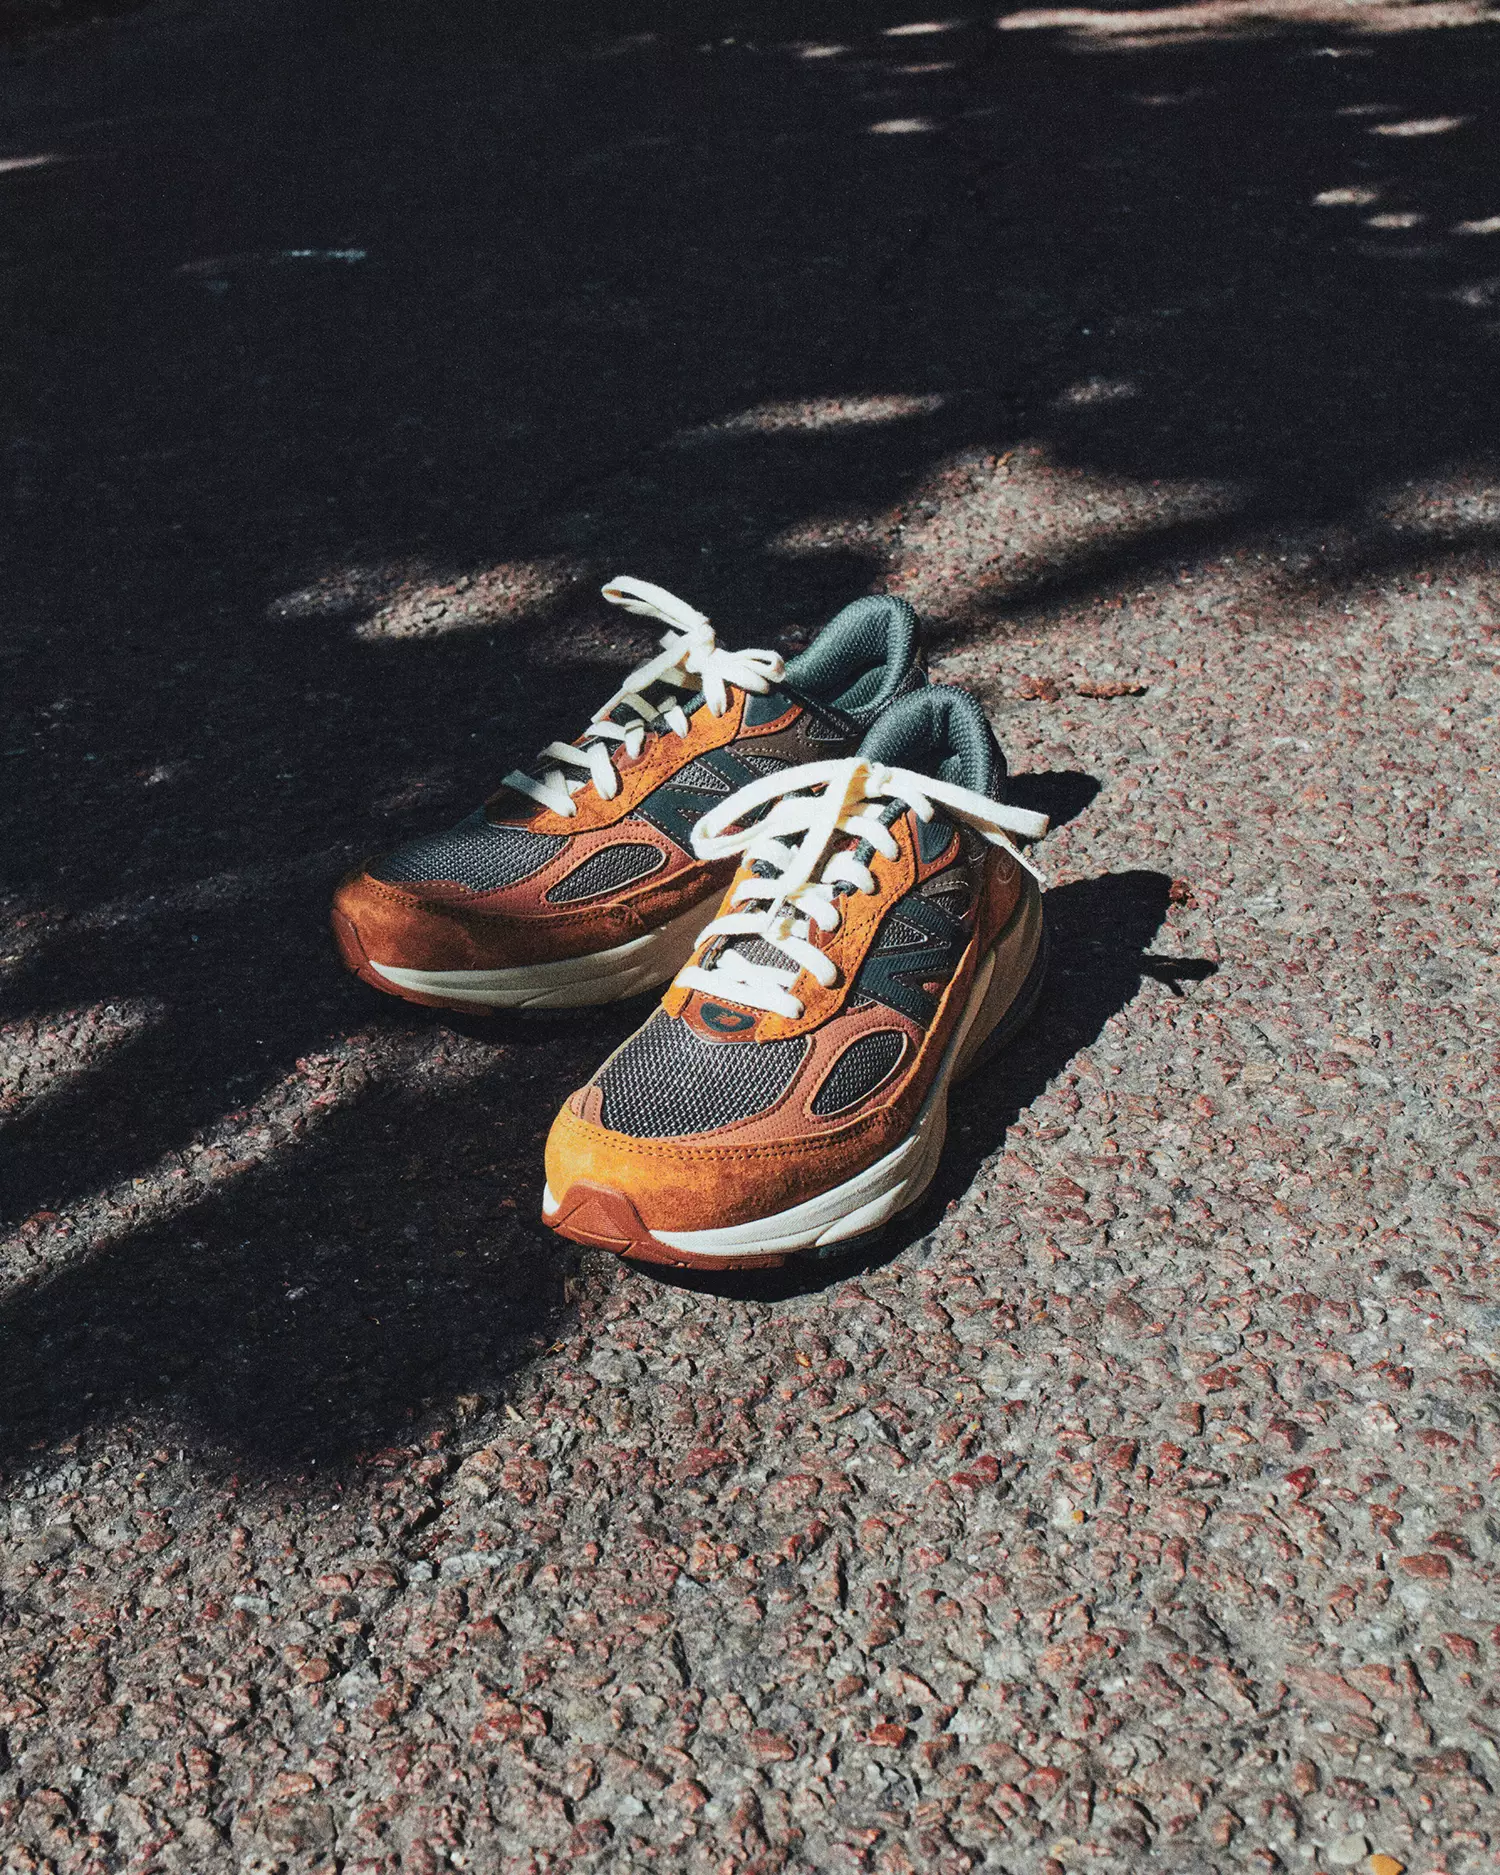 Carhartt WIP et New Balance annoncent la collaboration MADE in USA 990v6